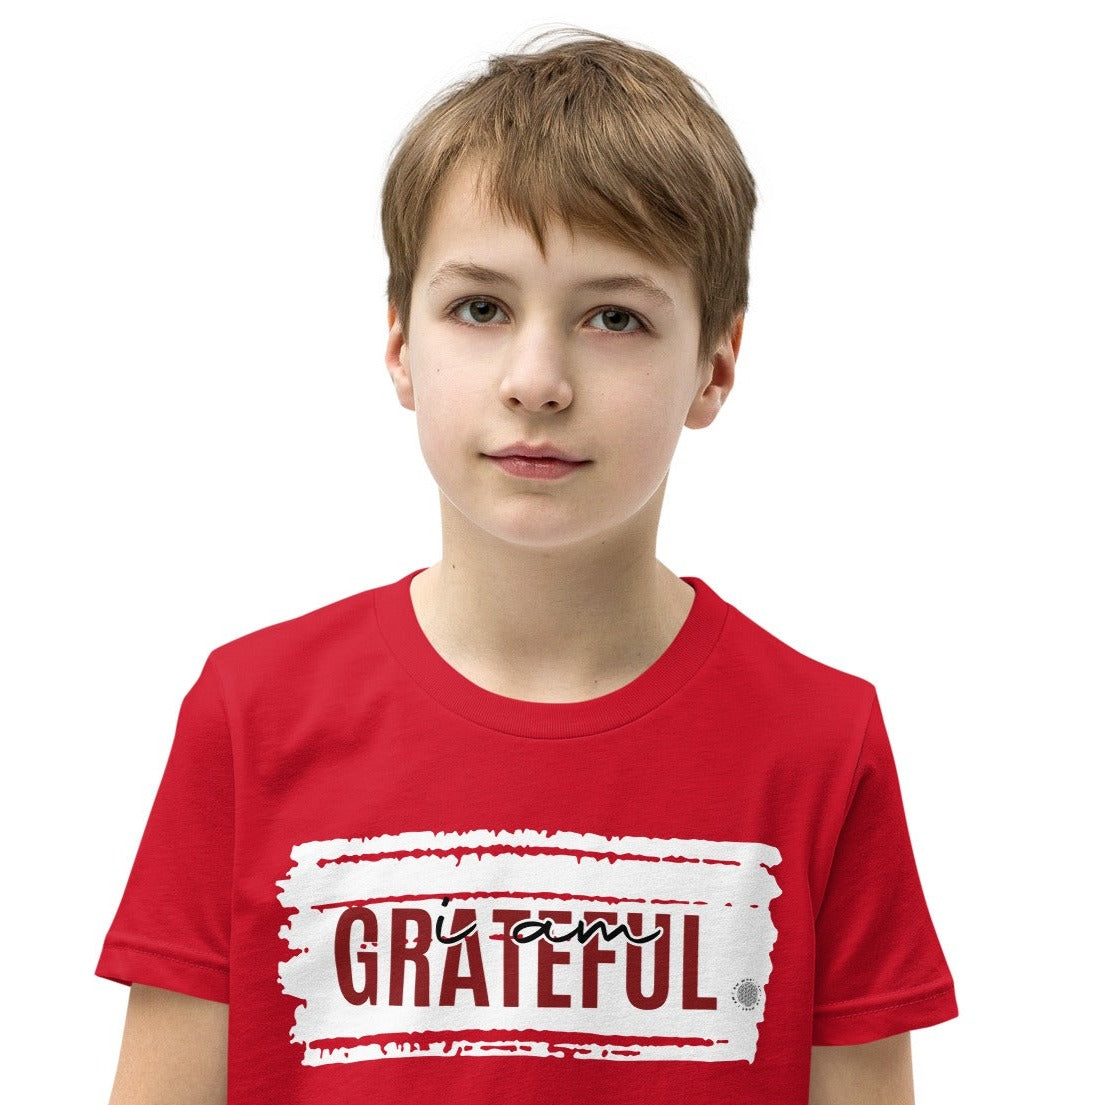 Our ‘I Am Grateful’ affirmation youth t-shirt describes how thankful your son or daughter is for mom and dad bringing world. Your child is so appreciative for every trip to soccer practice or music class you do.